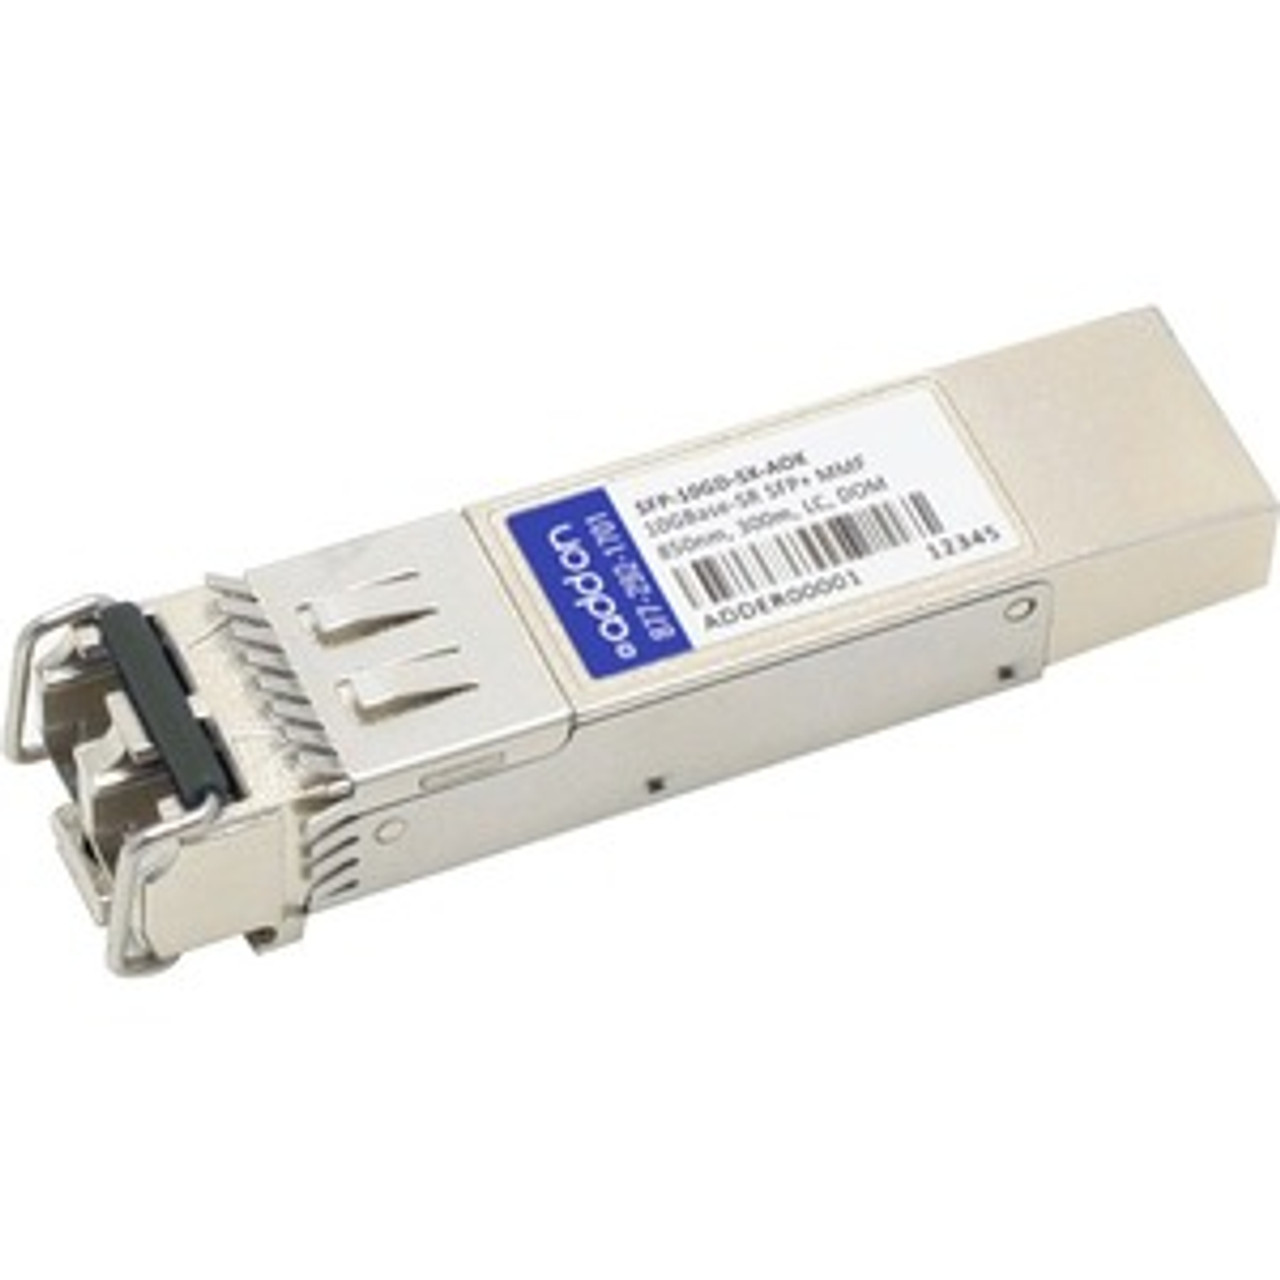 SFP-10GD-SX-AOK AddOn 10Gbps 10GBase-SX Multi-mode Fiber 300m 850nm Duplex LC Connector SFP+ Transceiver Module for MRV Compatible